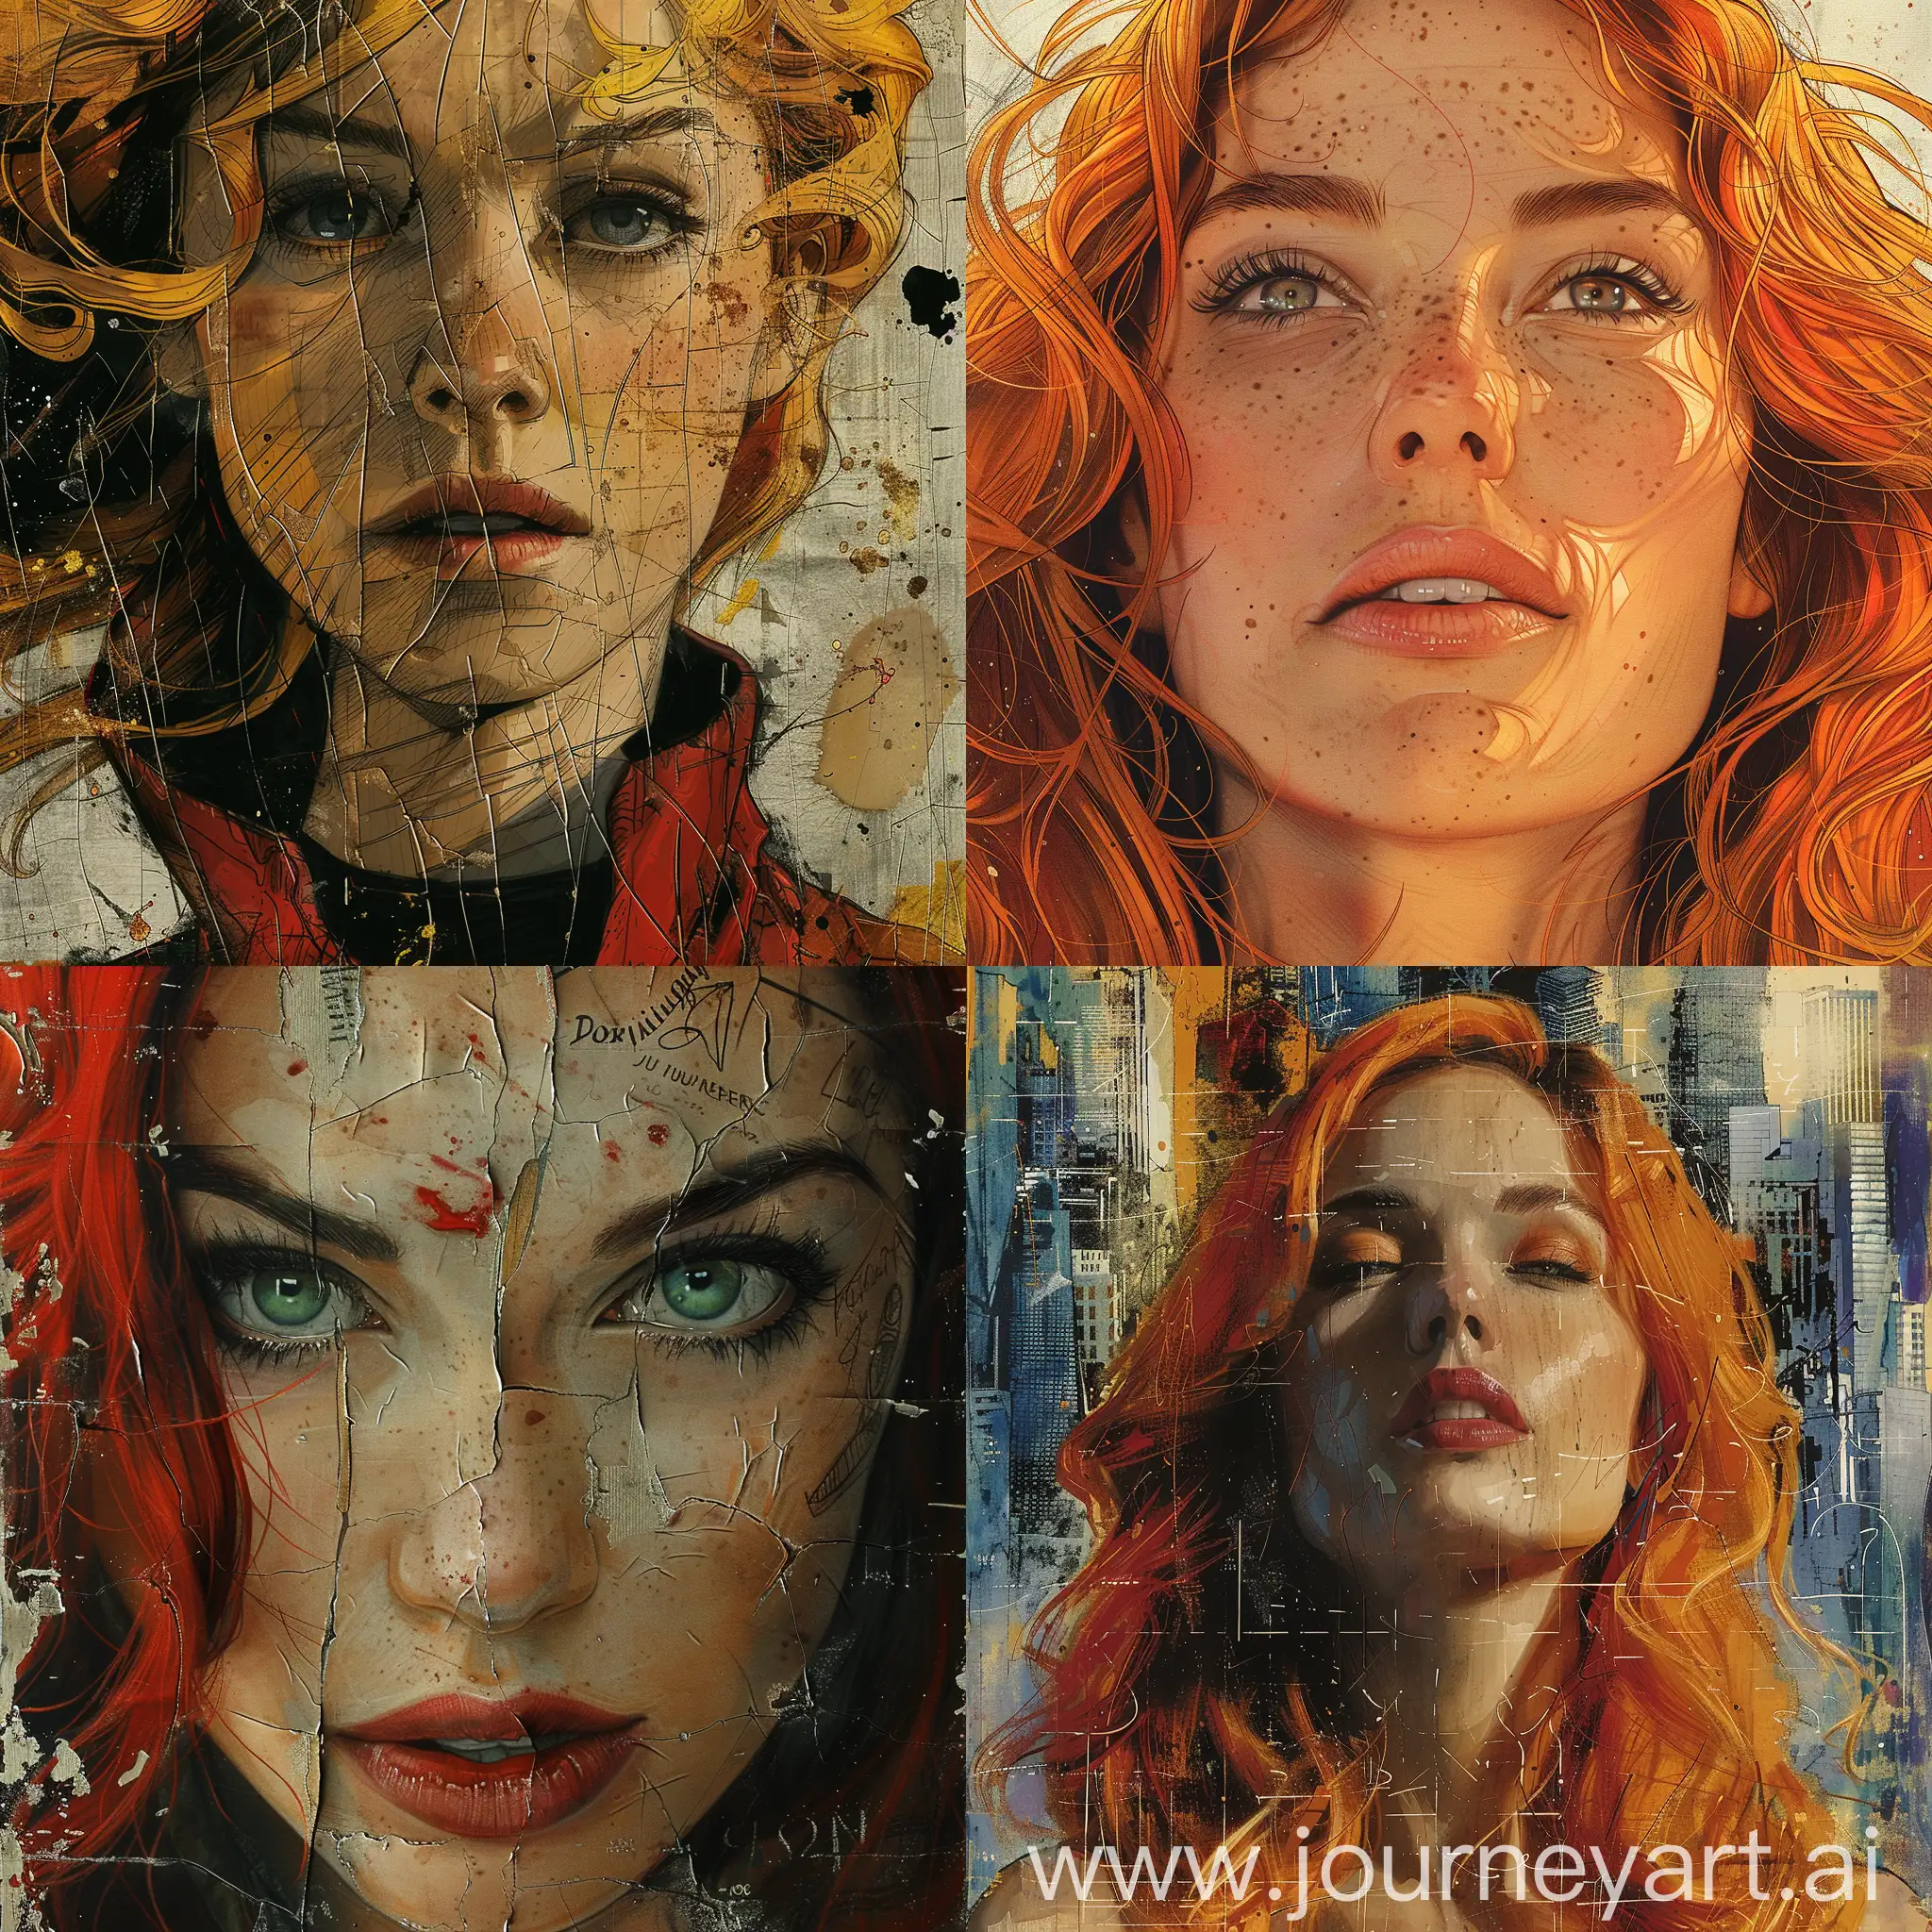 Dynamic-RedHaired-Woman-Collage-Comic-Book-Fusion-Art